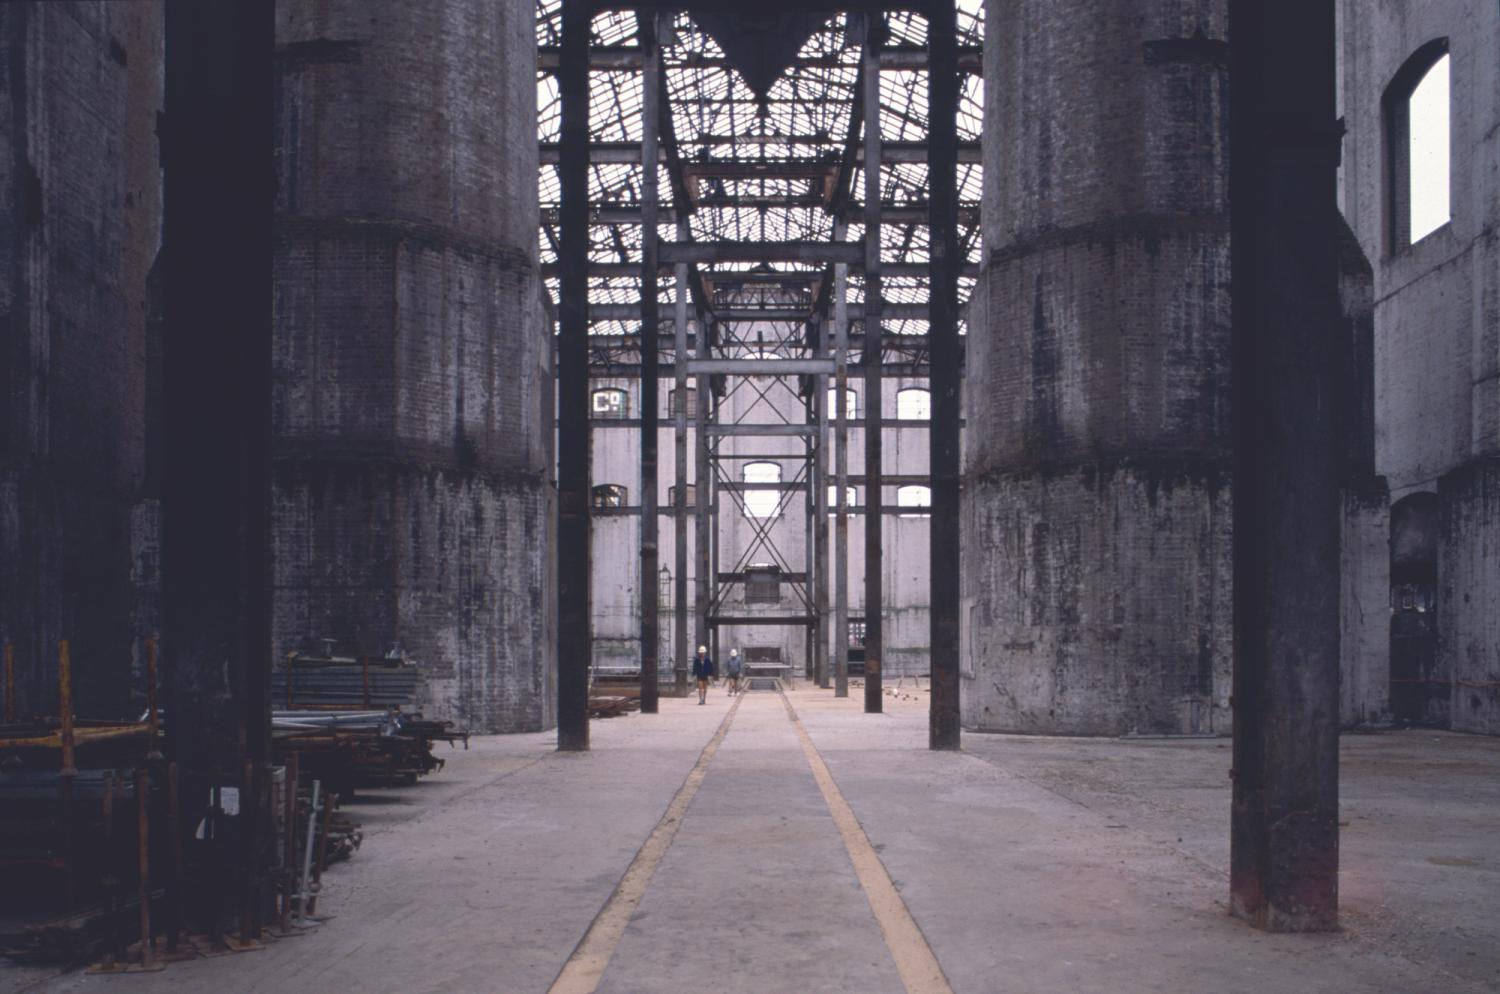 Photograph of gutted power station with two large chimney bases flanking each side of the image